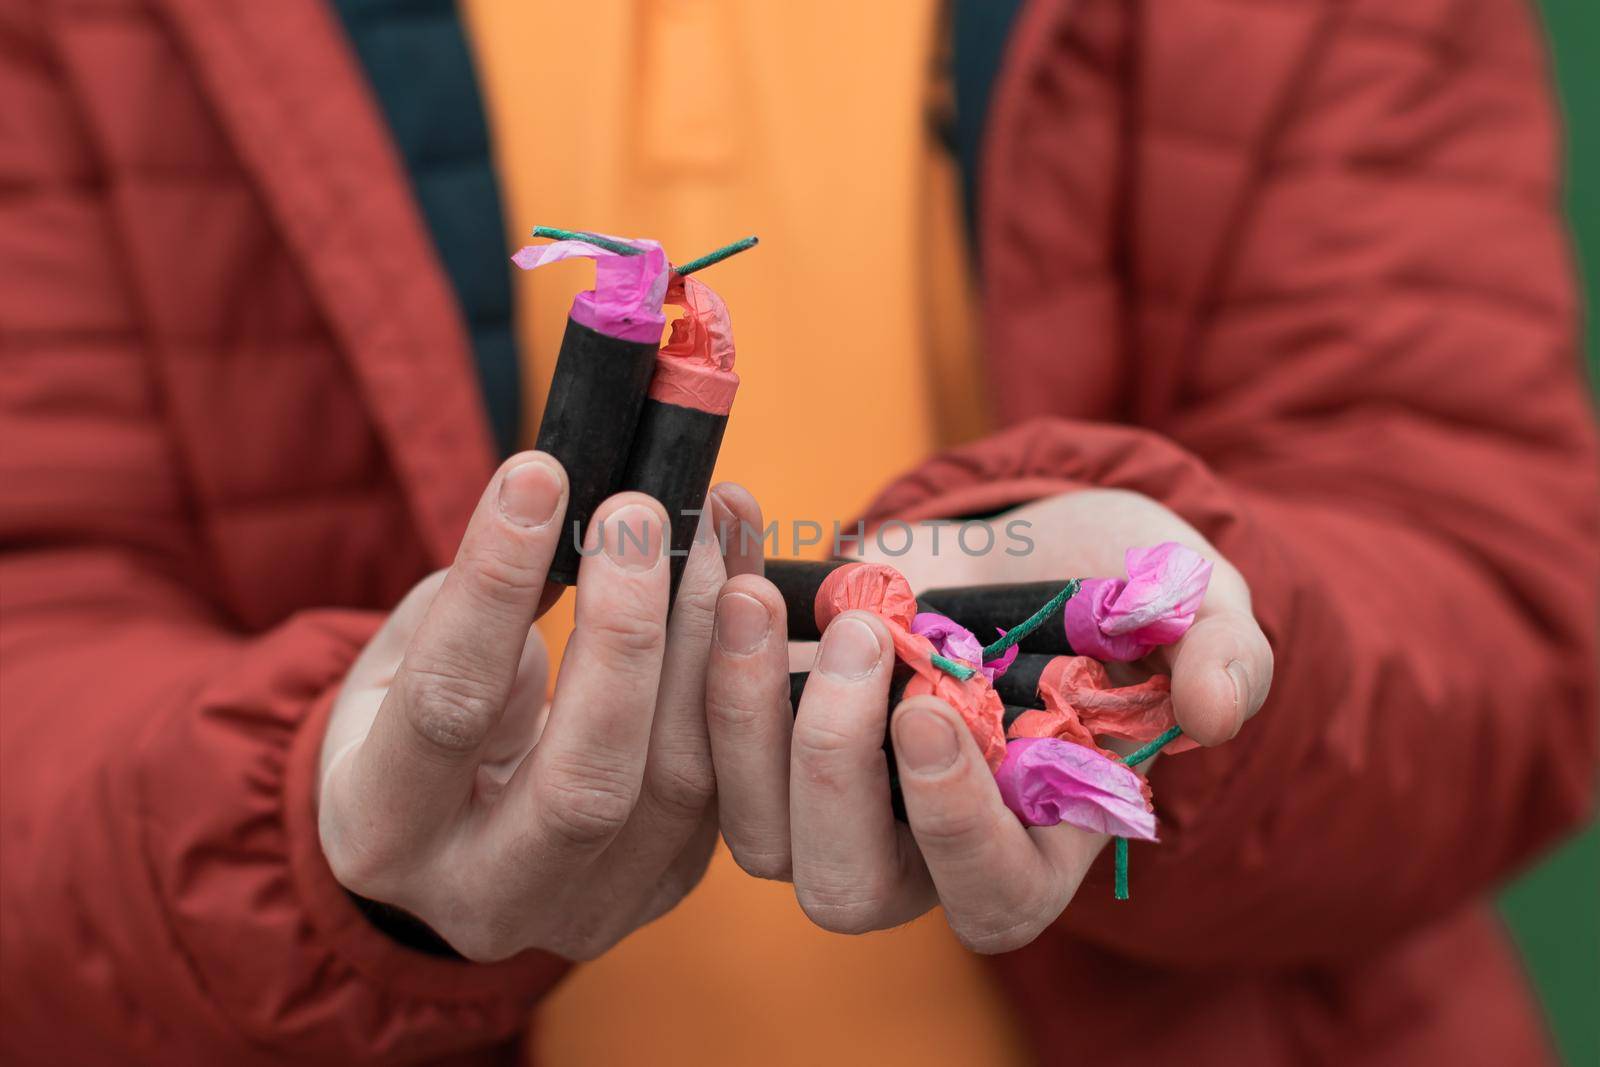 Man Holding Firecrackers in his Hand. Guy Getting Ready for New Year Fun - CloseUp Shot